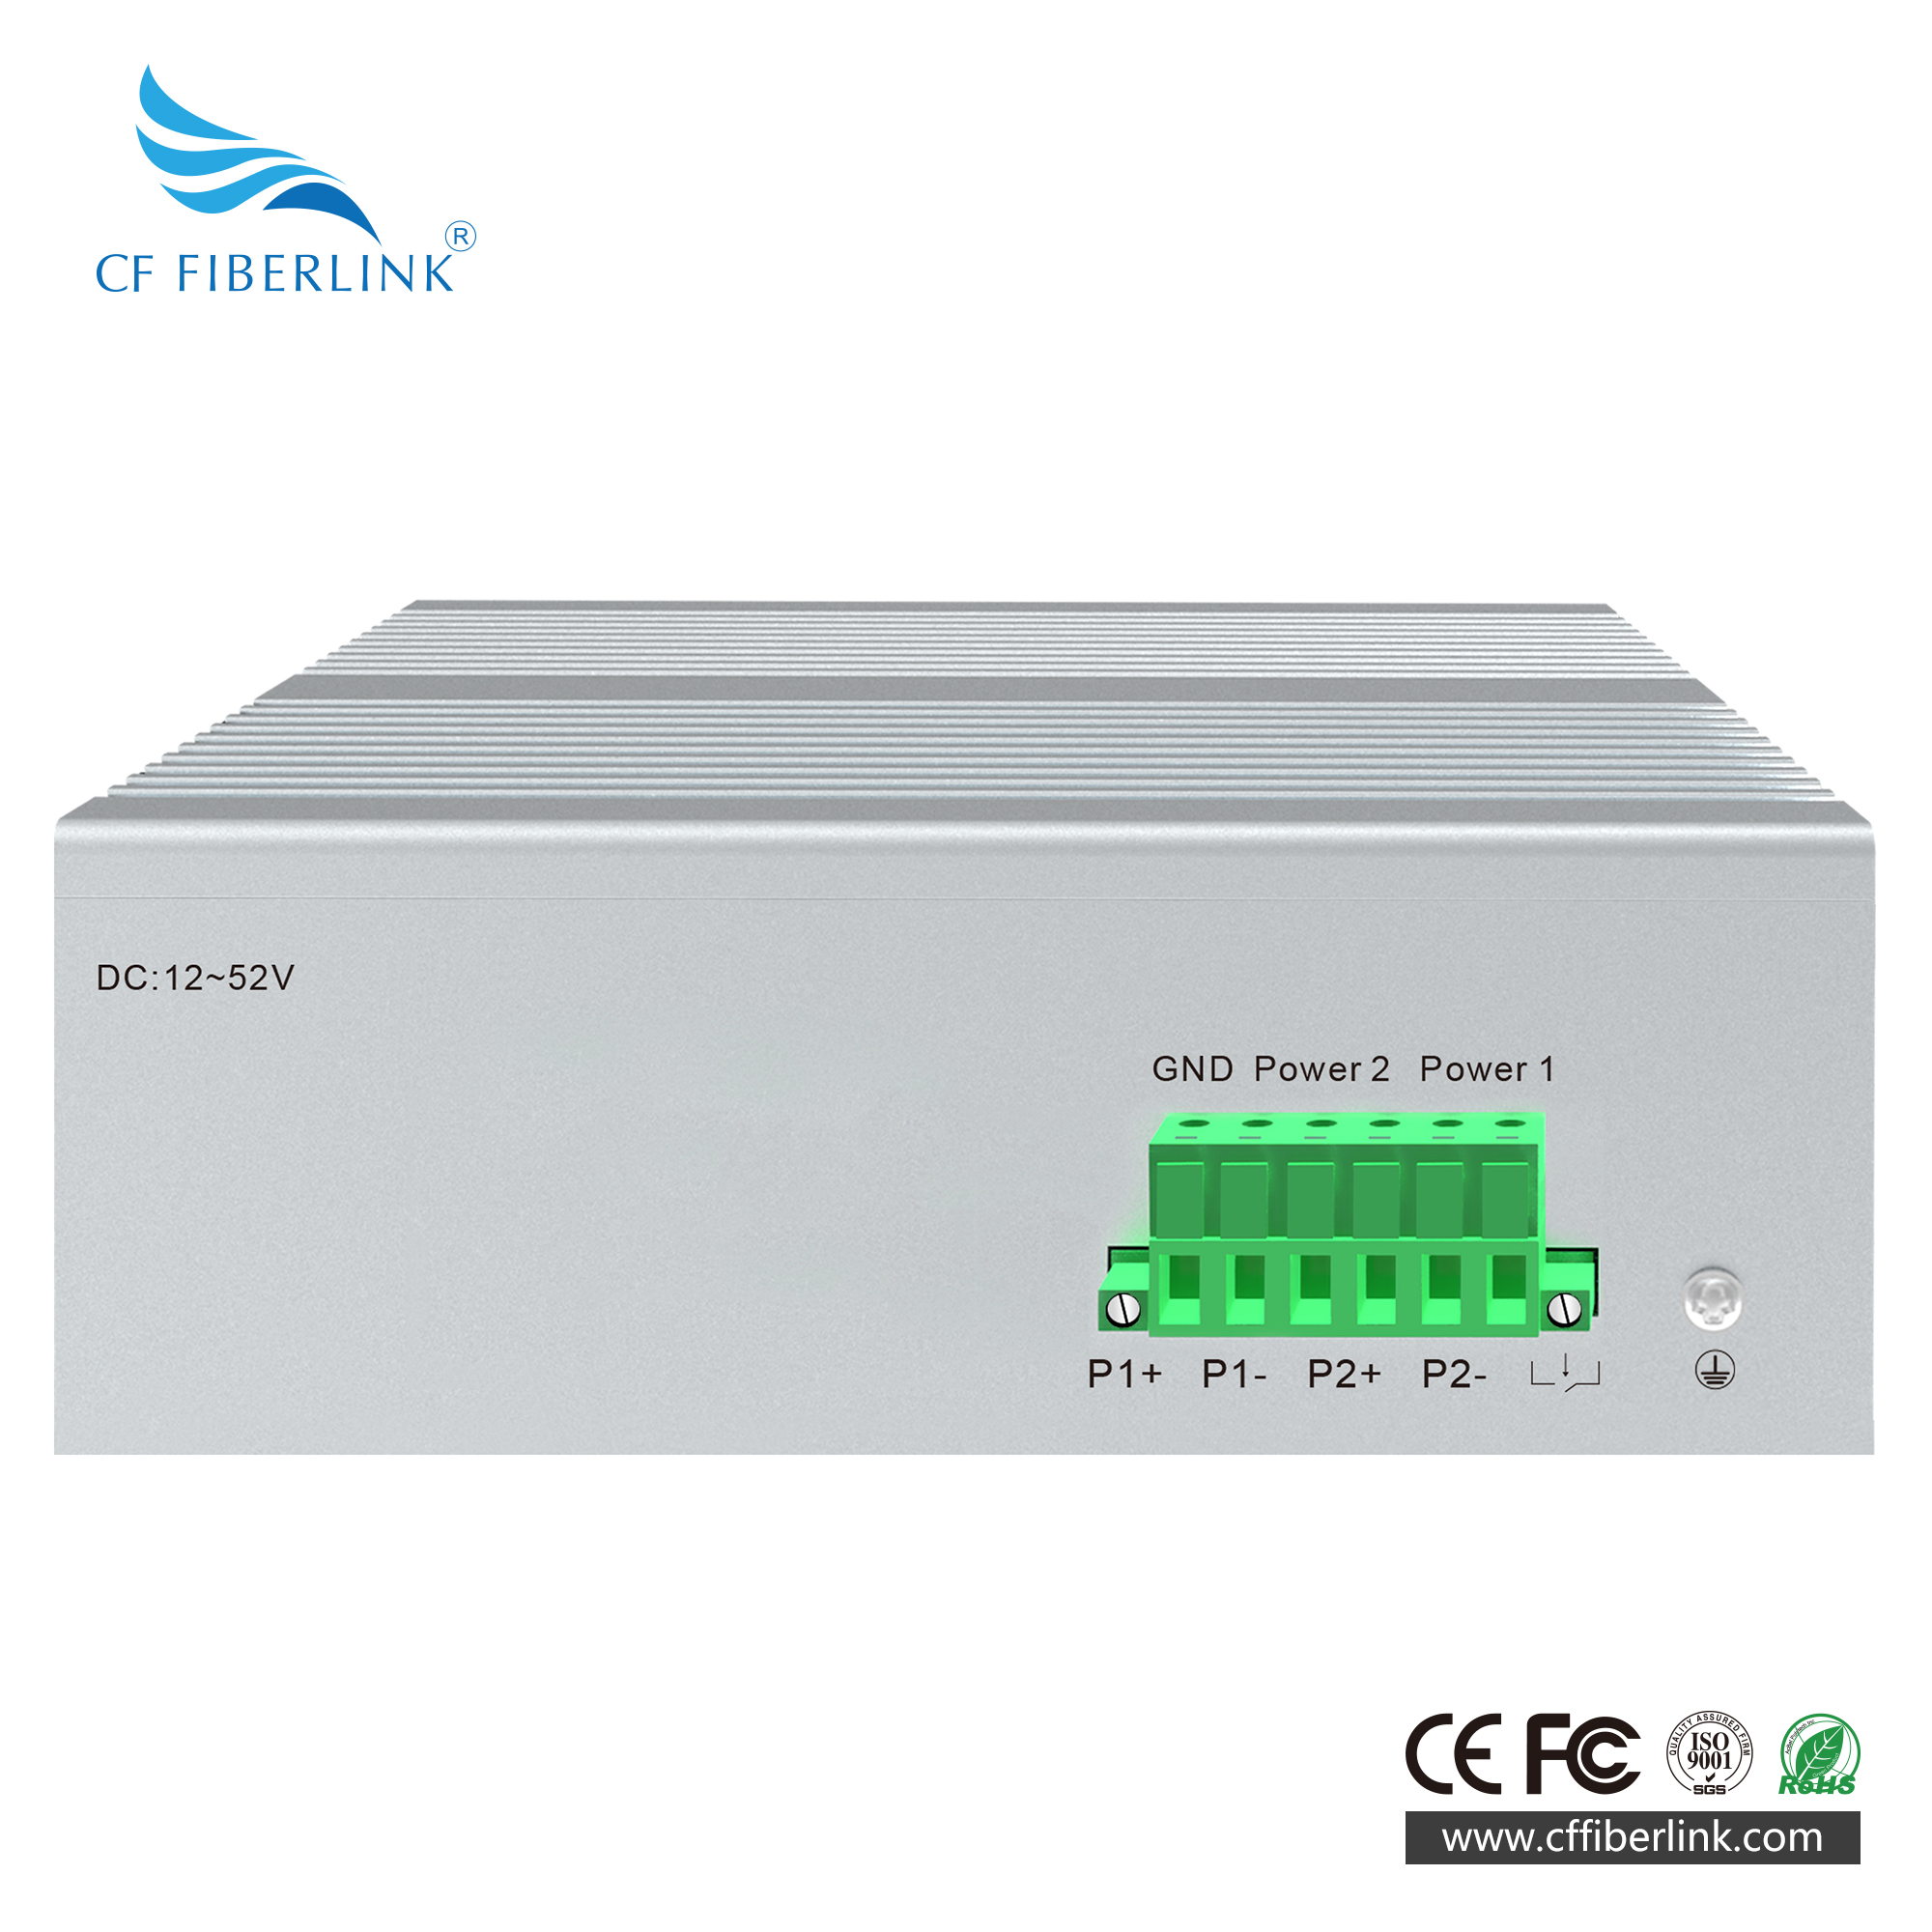 24-port 10/100/1000M Industrial Ethernet  Switch